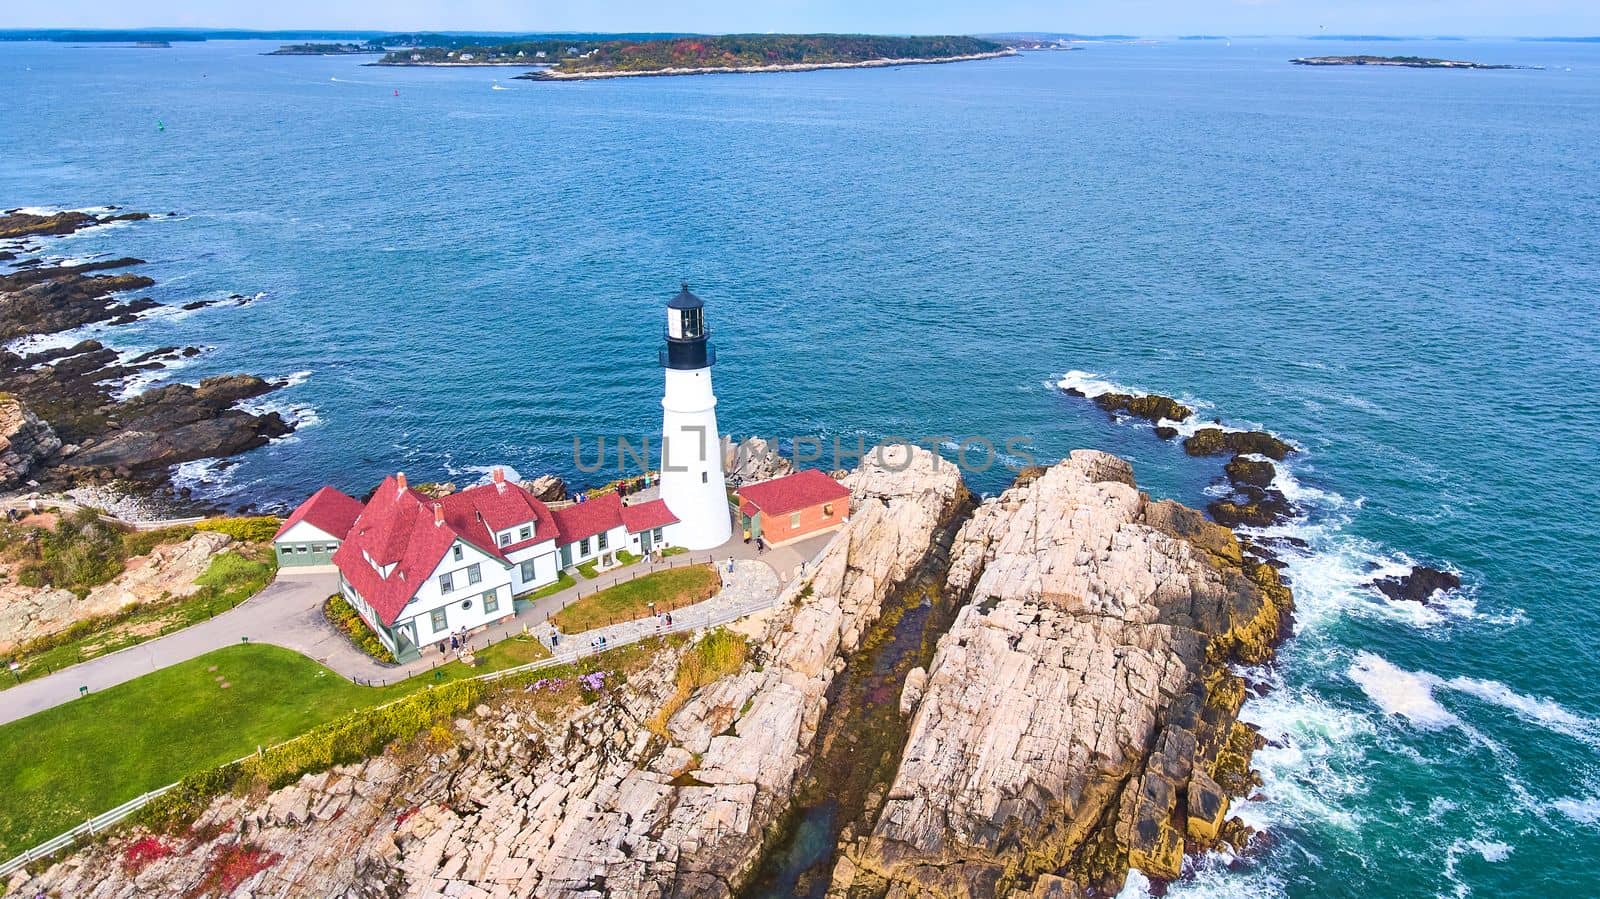 Aerial overlooking amazing Portland lighthouse in Maine with rocky coasts and crashing waves by njproductions